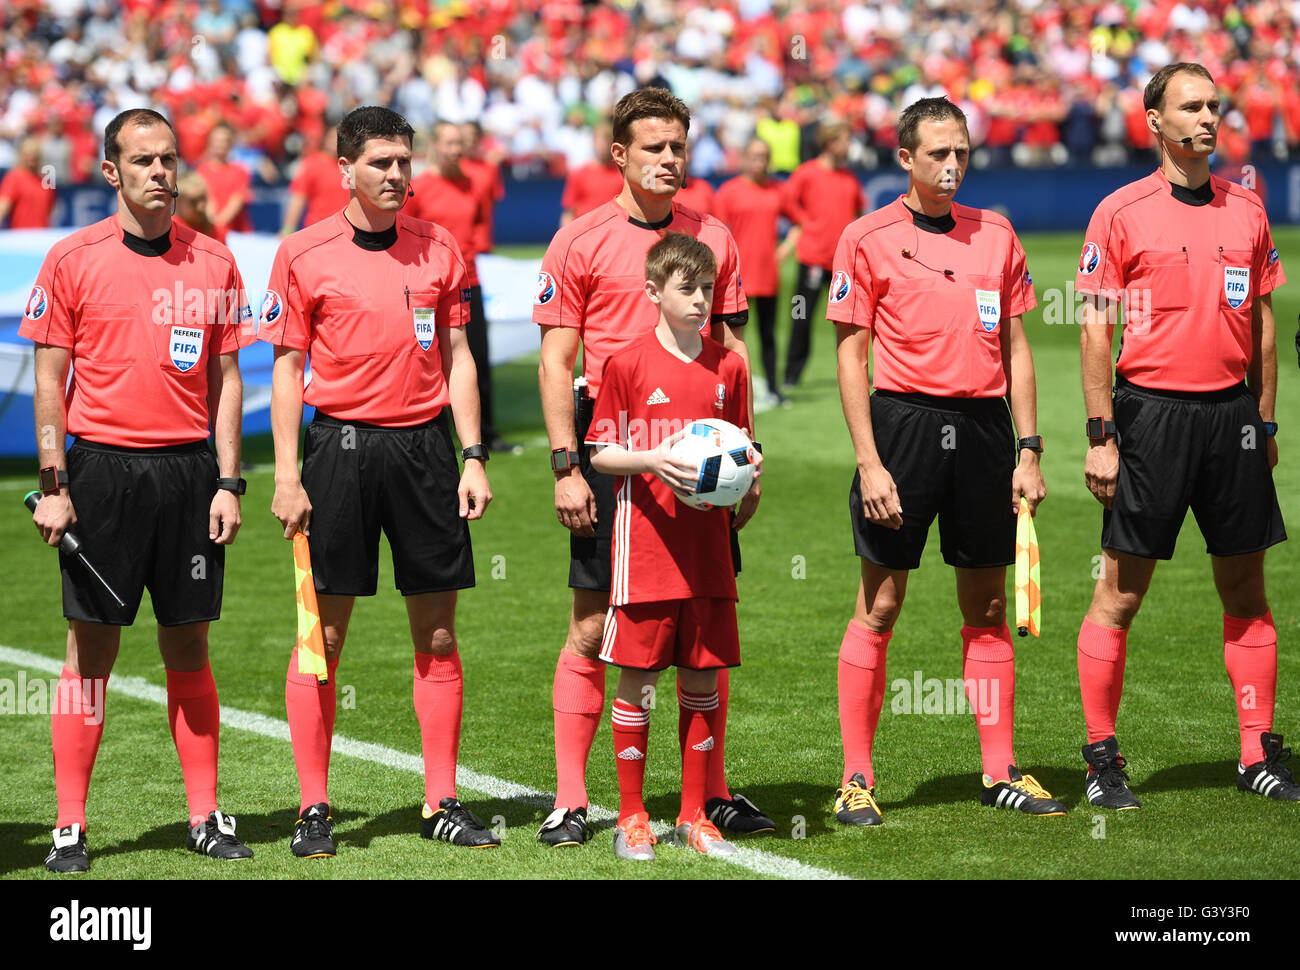 German referees Marco Fritz (L-R), Stefan Lupp, Felix Brych, Mark Borsch and Bastian Dankert during the Euro 2016 Group B soccer match between England and Wales at the Stade Bollaert-Delelis stadium, Lens, France, June 16, 2016. Photo: Marius Becker/dpa Stock Photo